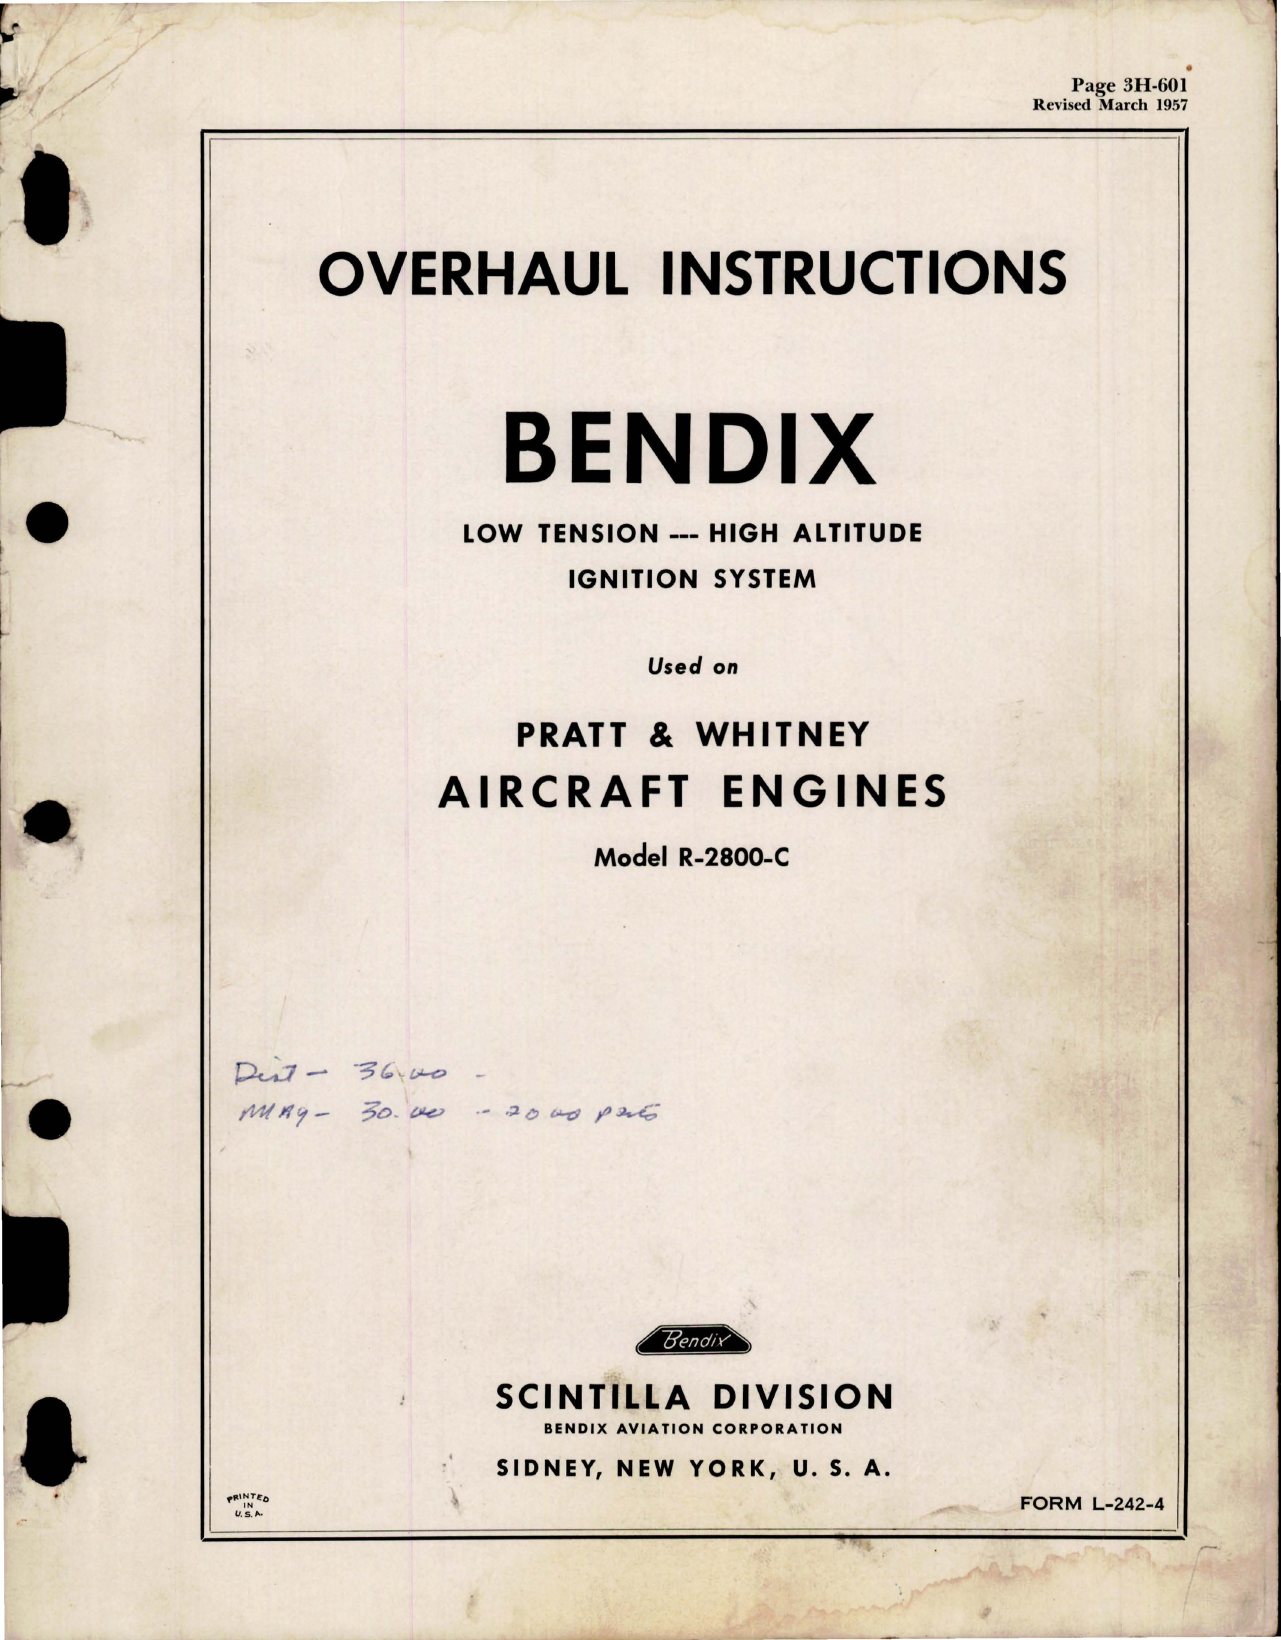 Sample page 1 from AirCorps Library document: Overhaul Instructions for Bendix Low Tension High Altitude Ignition System